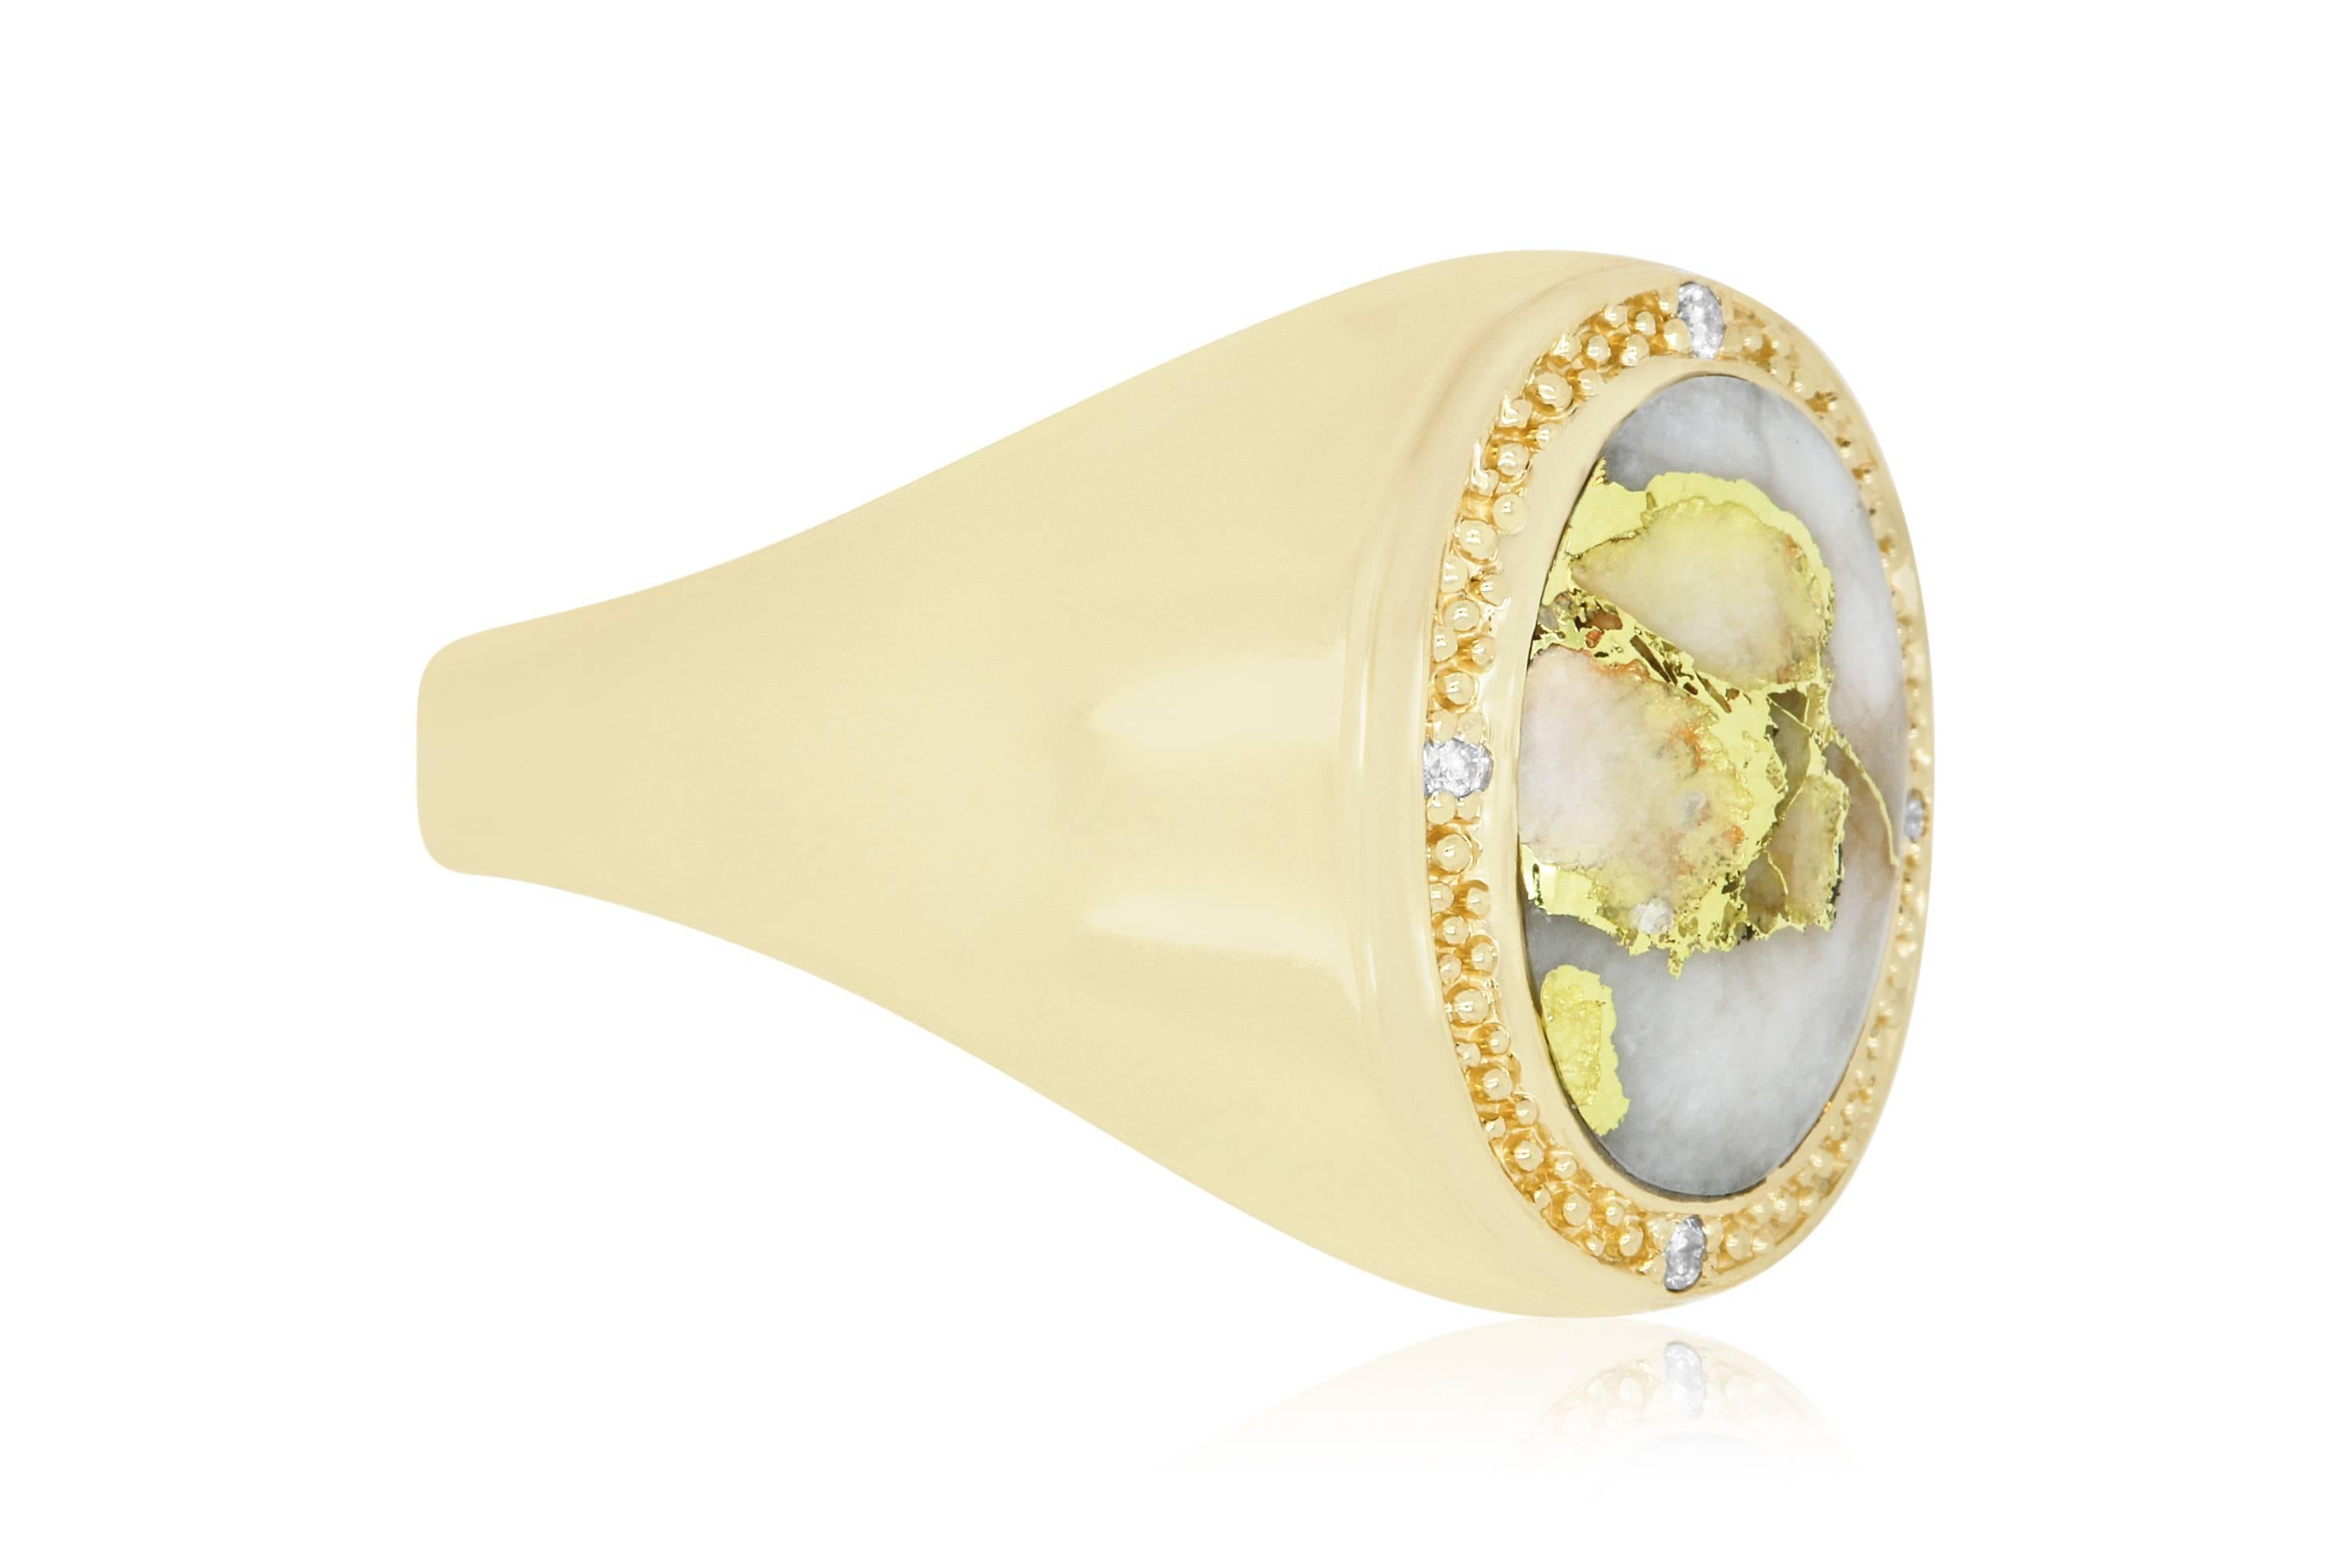 This unique Gold in Quartz stone weighs in at 4.5 carats. Set in a 14k Yellow Gold with 4 white diamonds, it is a guaranteed show stopper!

Material: 14k Yellow Gold
Gemstones: 1 Oval Gold in Quartz at 4.5 Carats.
Diamonds: 4 Brilliant Round White